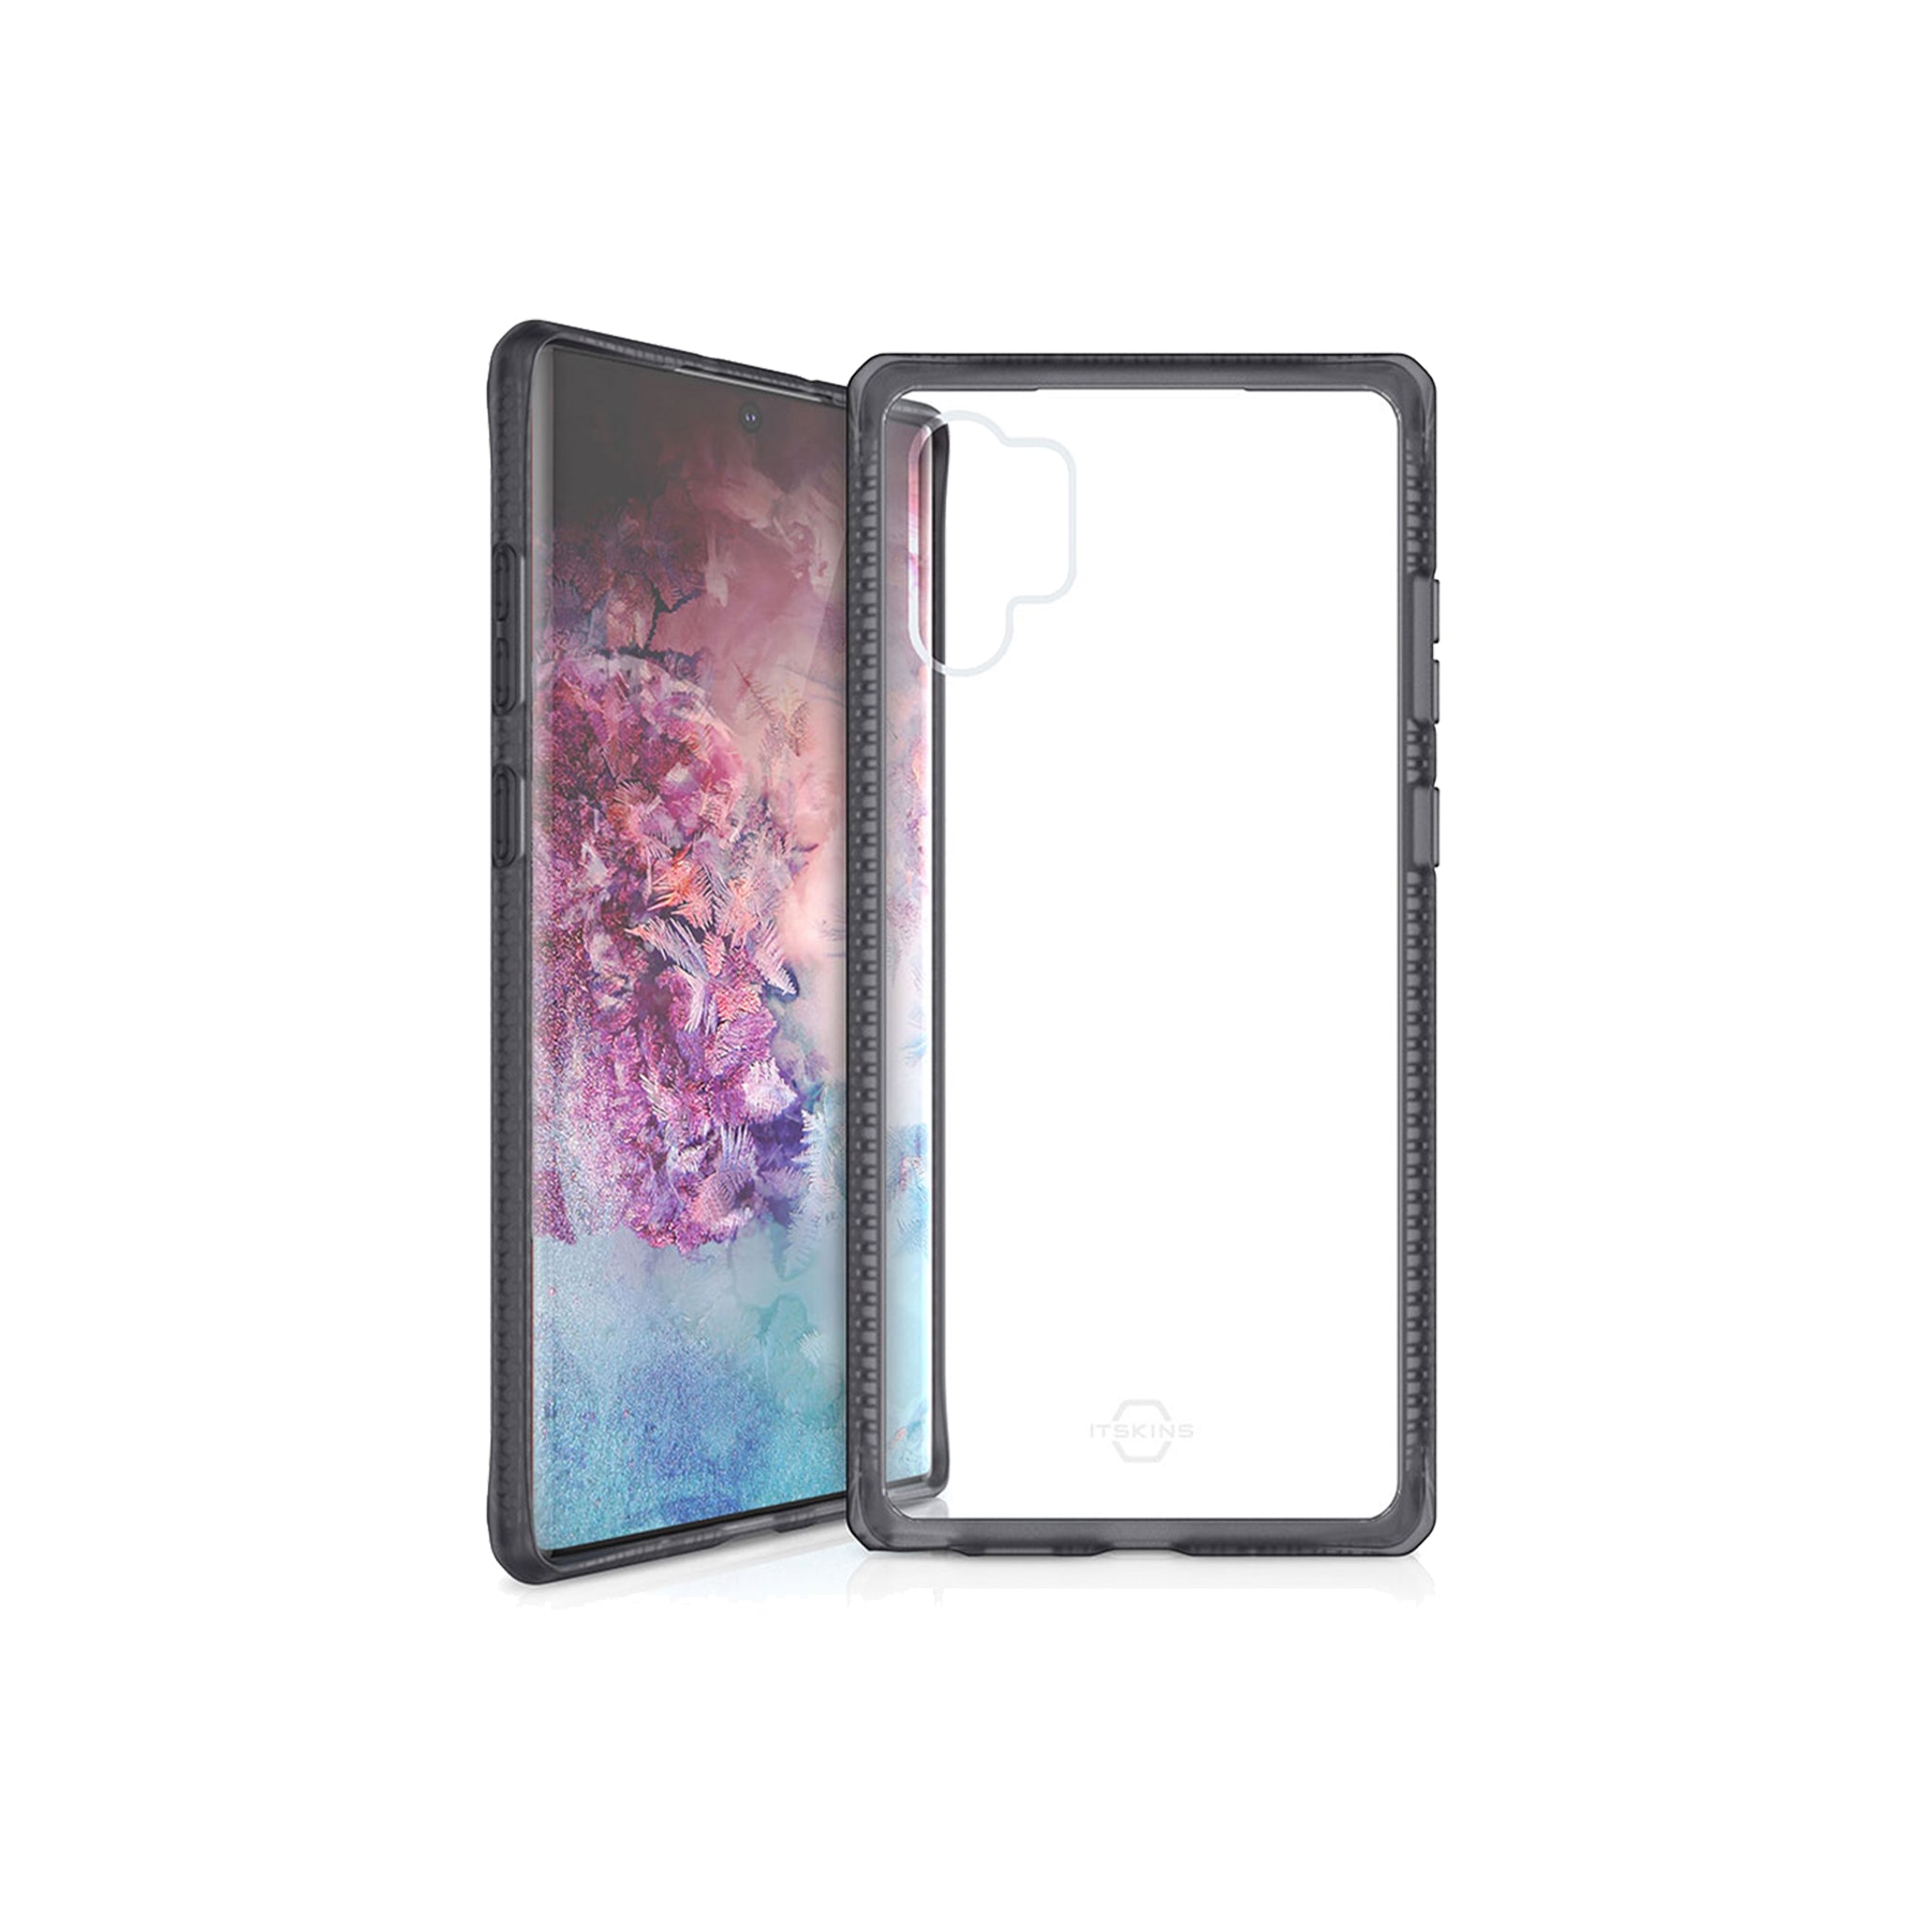 Itskins - Hybrid Frost Mkii Case For Samsung Galaxy Note 10 Plus - Black And Transparent